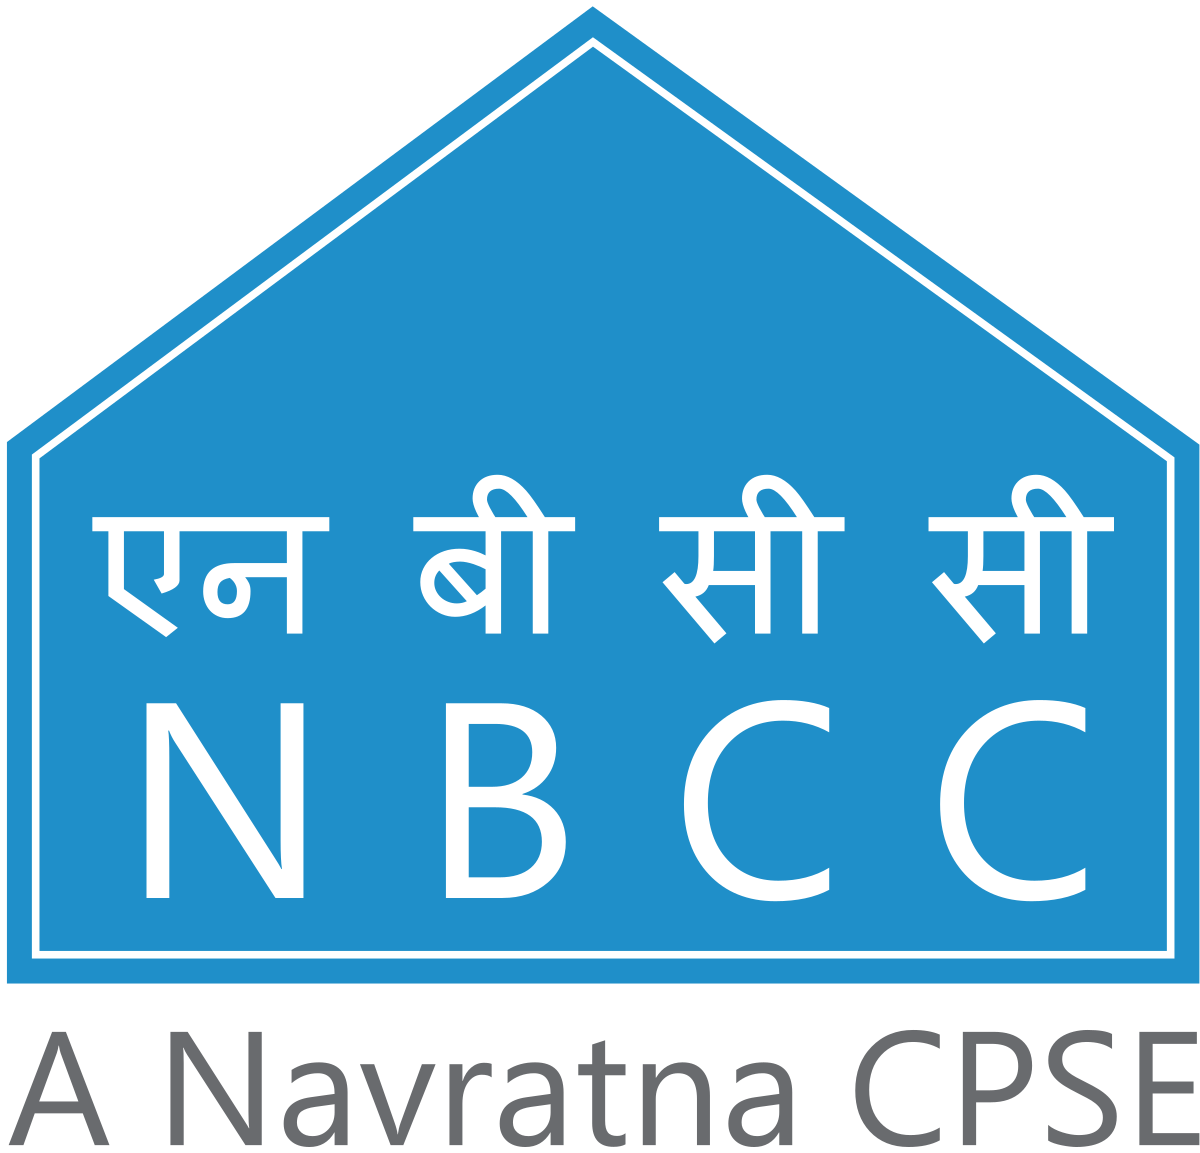 NBCC India attains orders of Rs. 204.49 crores